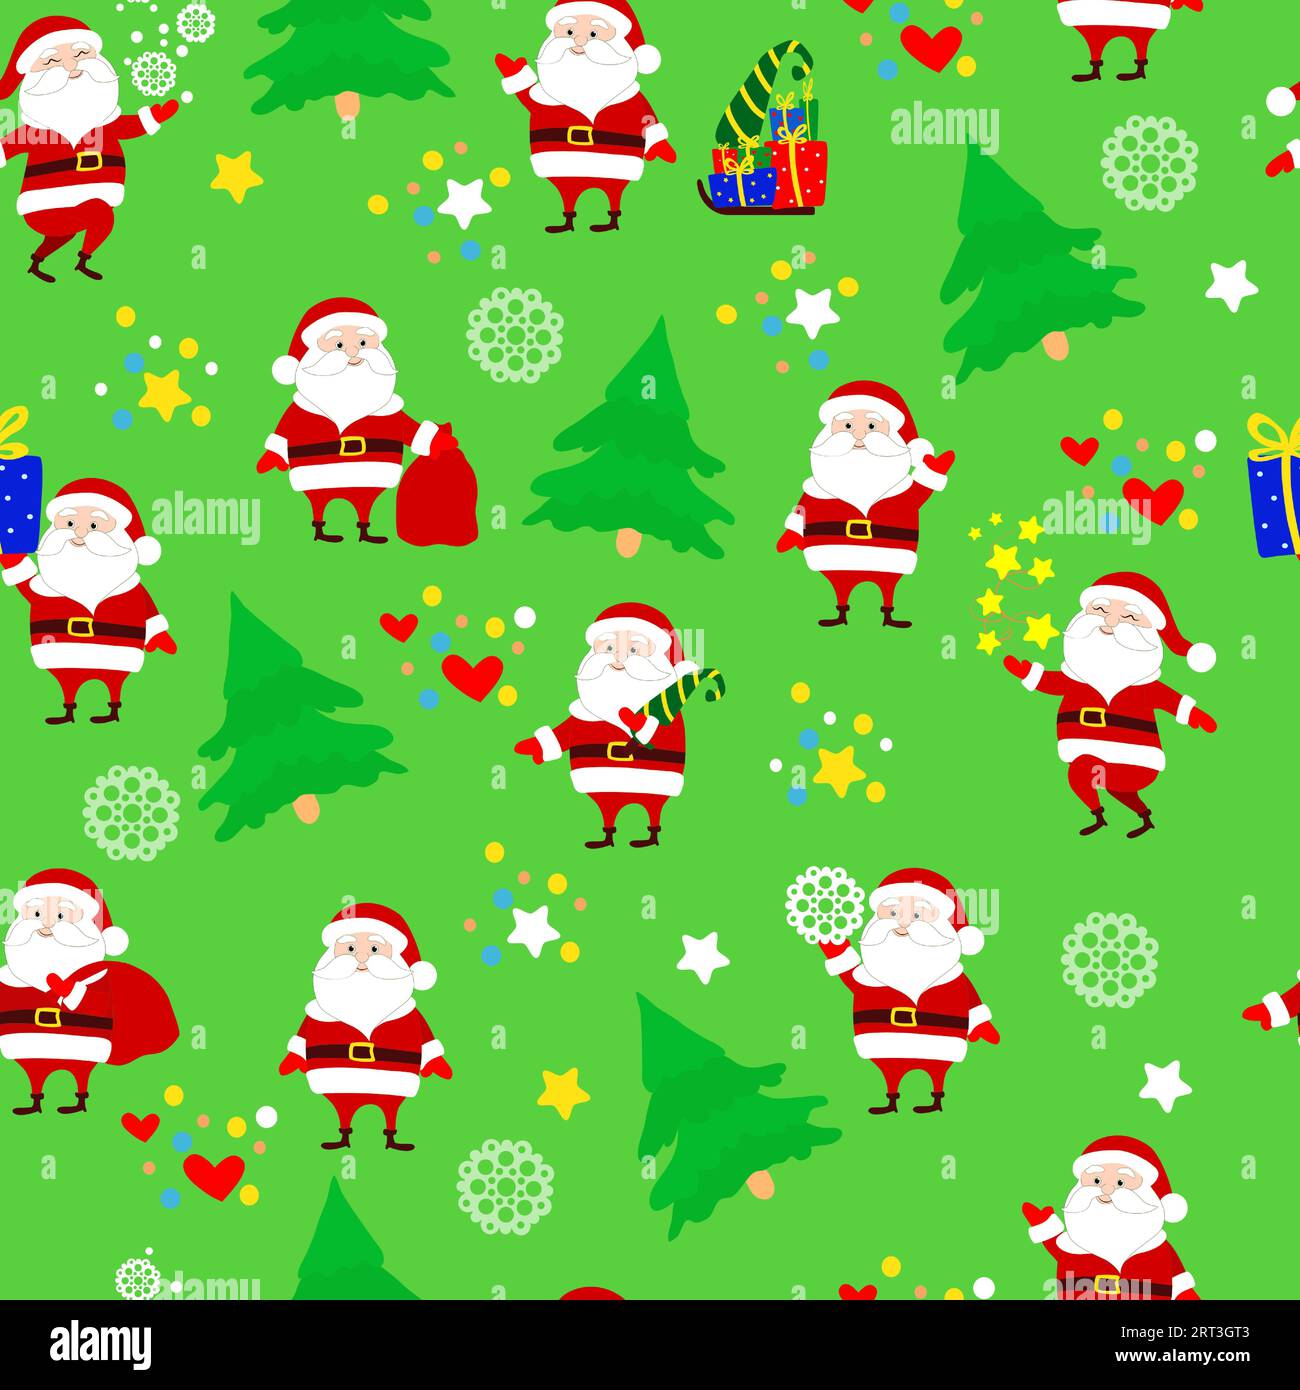 Seamless Christmas pattern Santa Claus in different poses, forest firs, snowflakes, gifts, stars on a green background. Pattern for packaging. Stock Vector